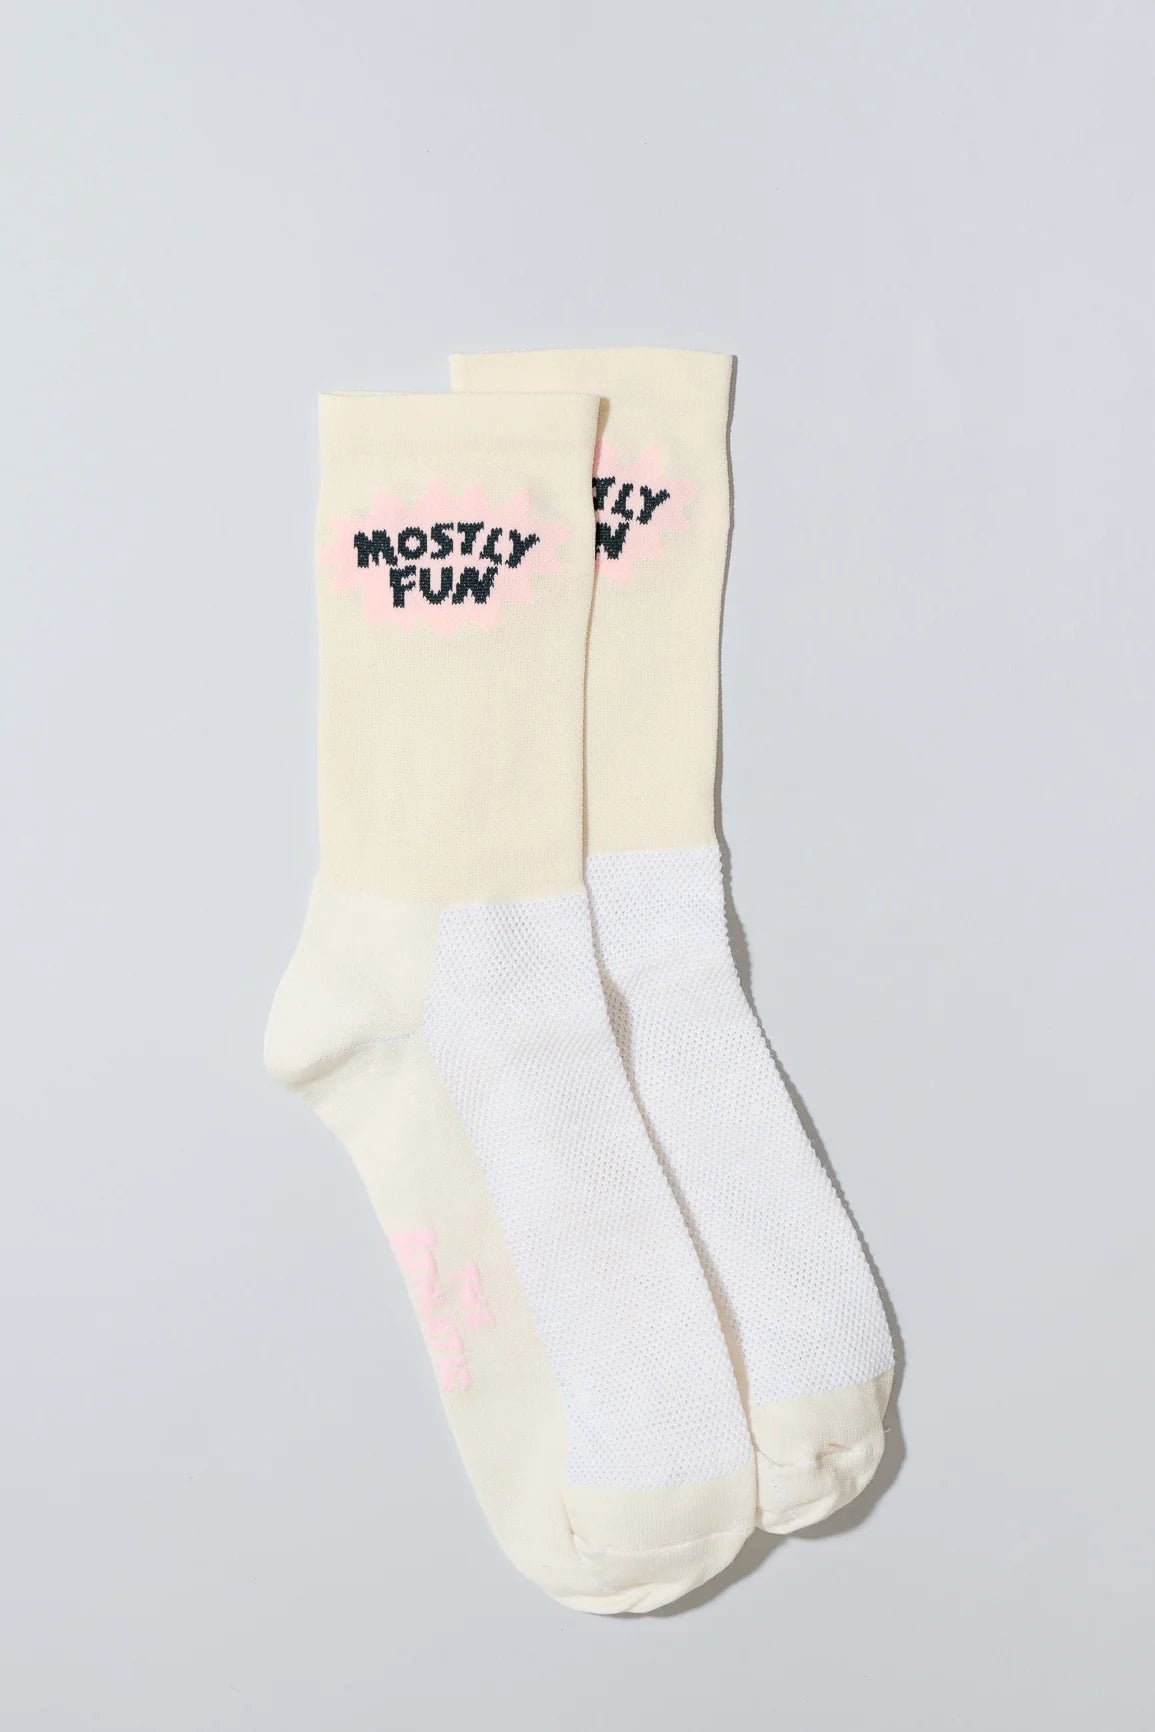 THE ATHLETIC COMMUNITY Mostly Fun Oatmeal Cycling Socks